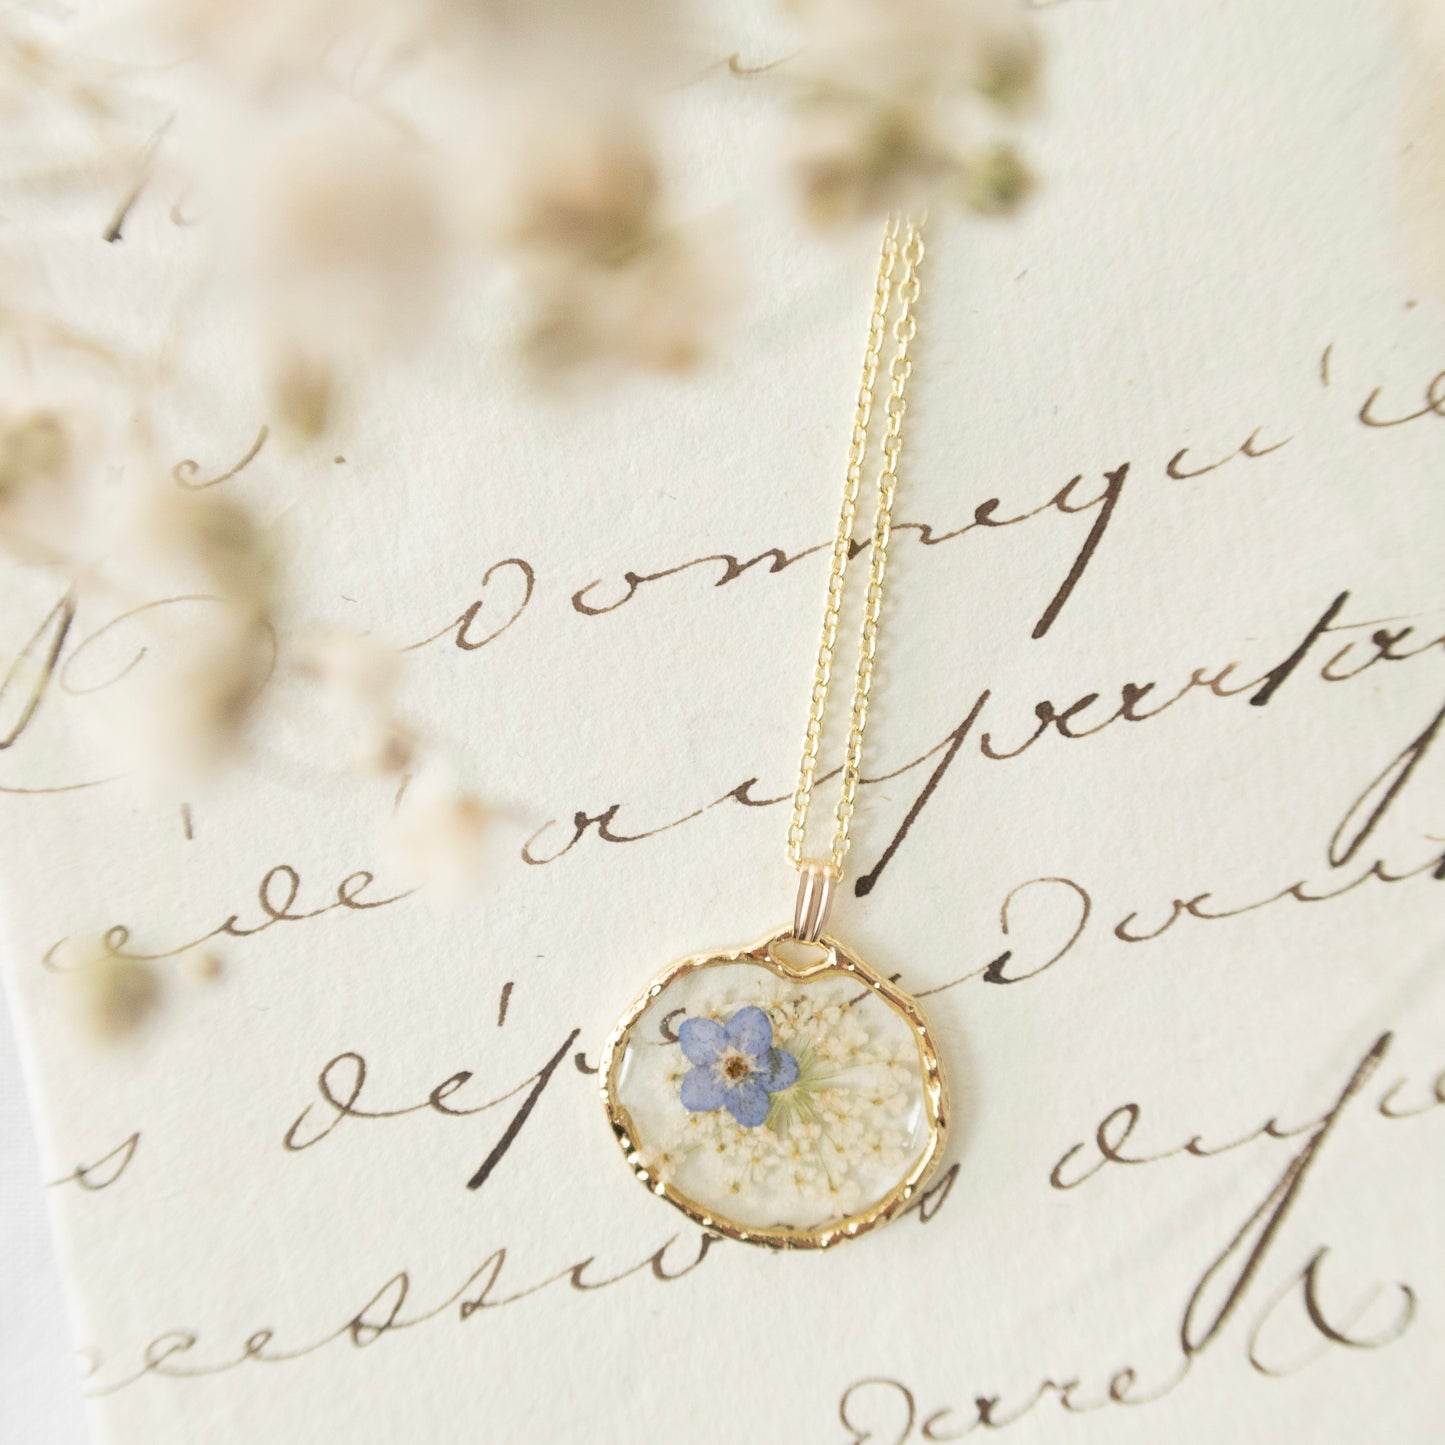 The Trouvaille Blue Forget Me Not Necklace